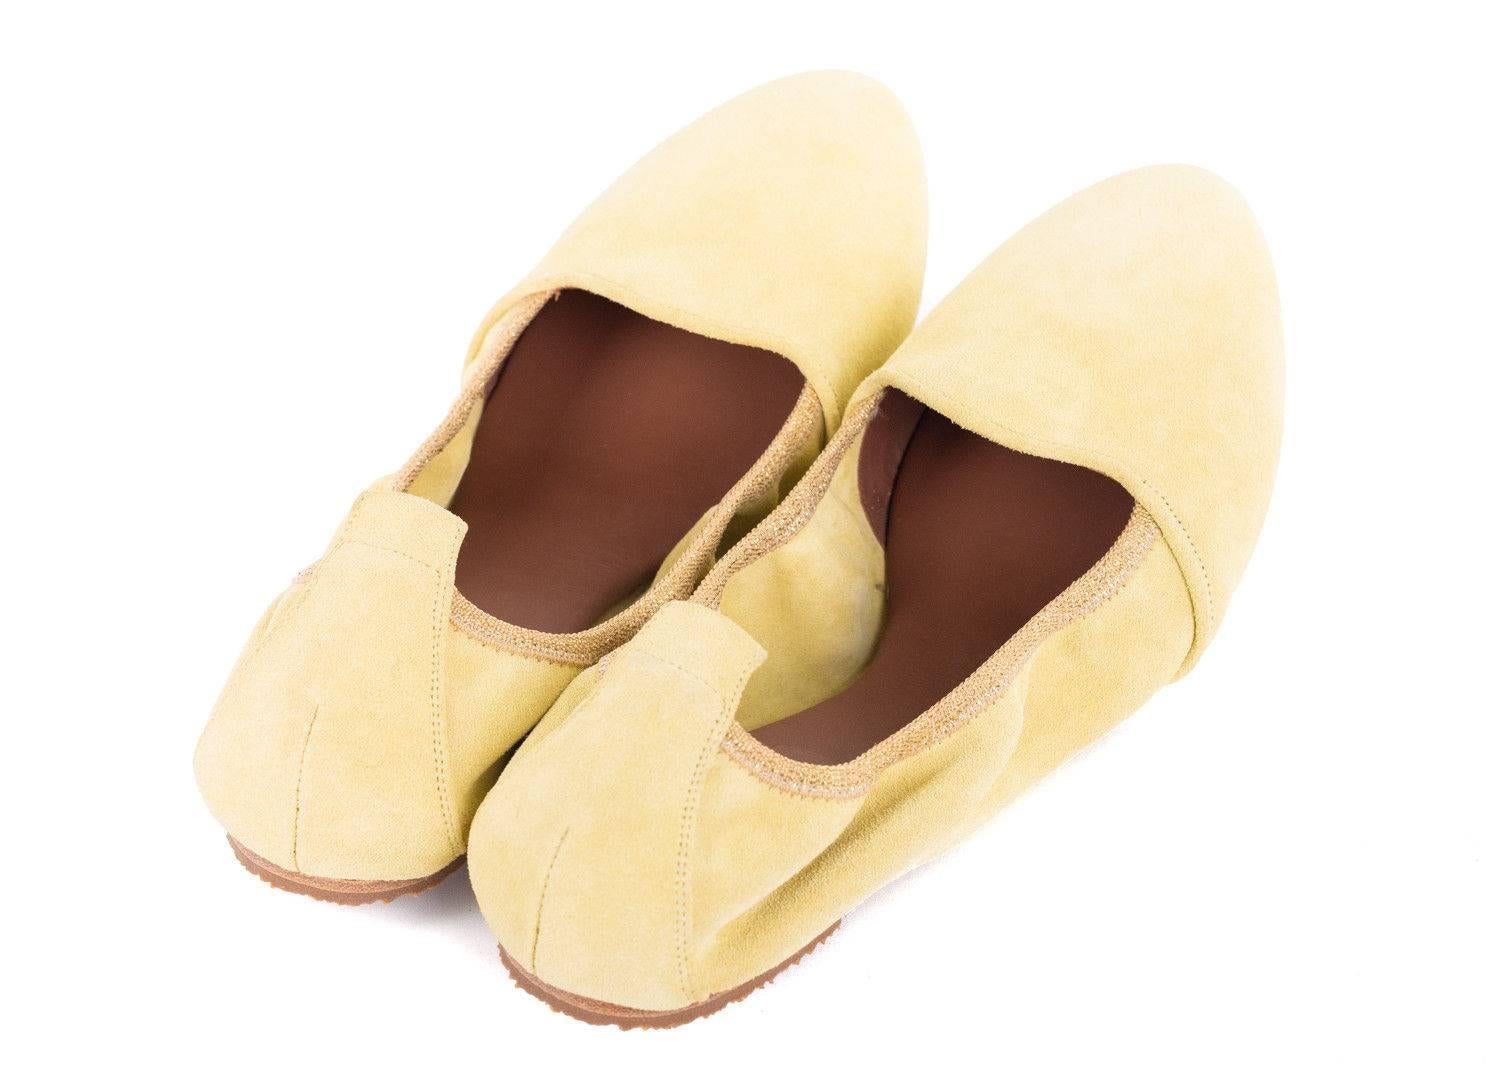 runello Cucinelli's pale yellow ballet flats are every woman's spicy essential. These flats feature a richly smooth suede panel, gold lurex trimmed elastic band, and tonal heel cap. You can pair these shoes with any dress, pants, or two piece